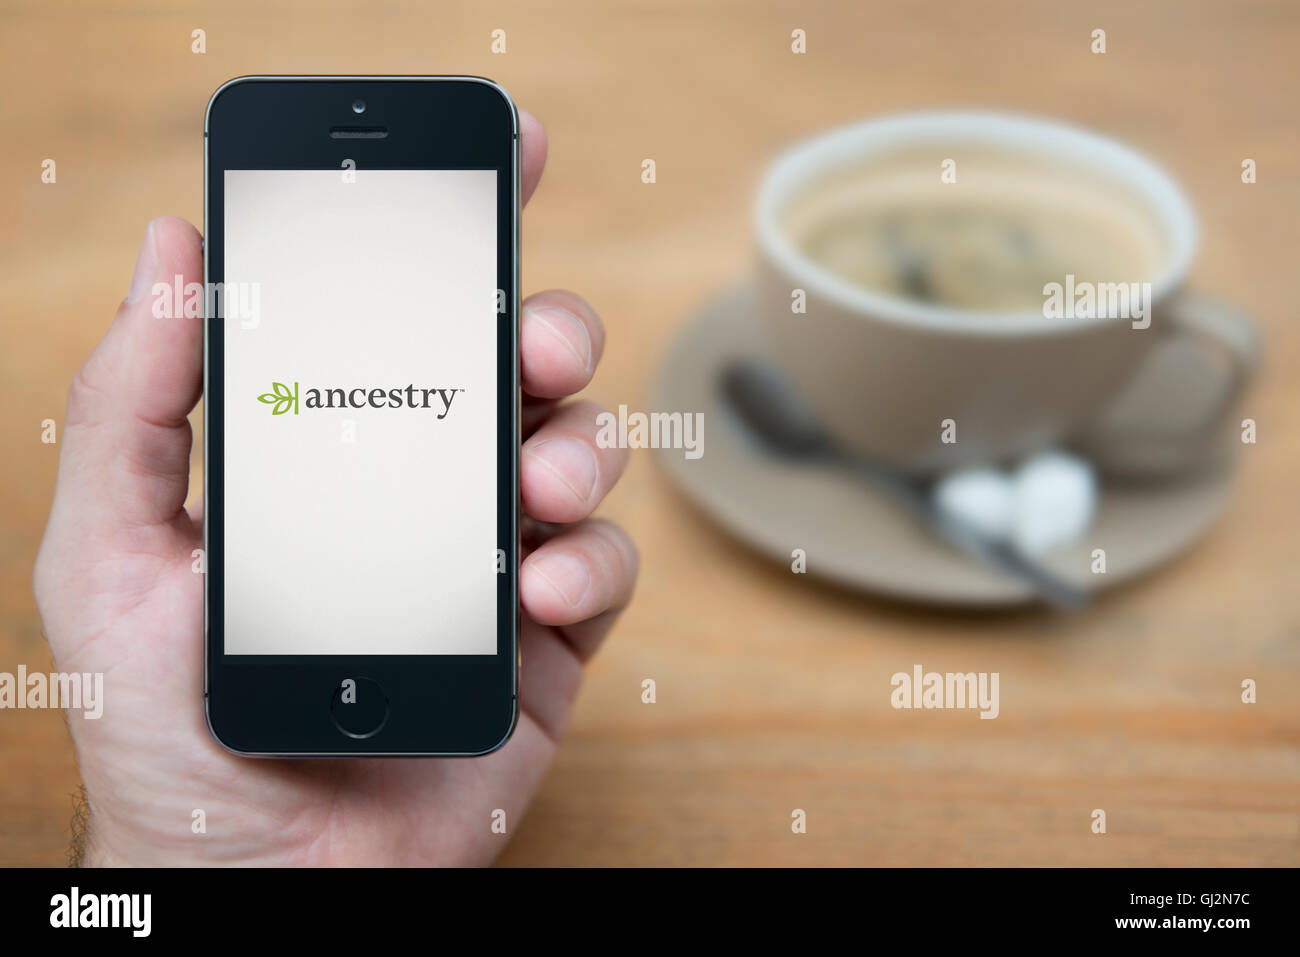 A man looks at his iPhone which displays the Ancestry.com logo, while sat with a cup of coffee (Editorial use only). Stock Photo